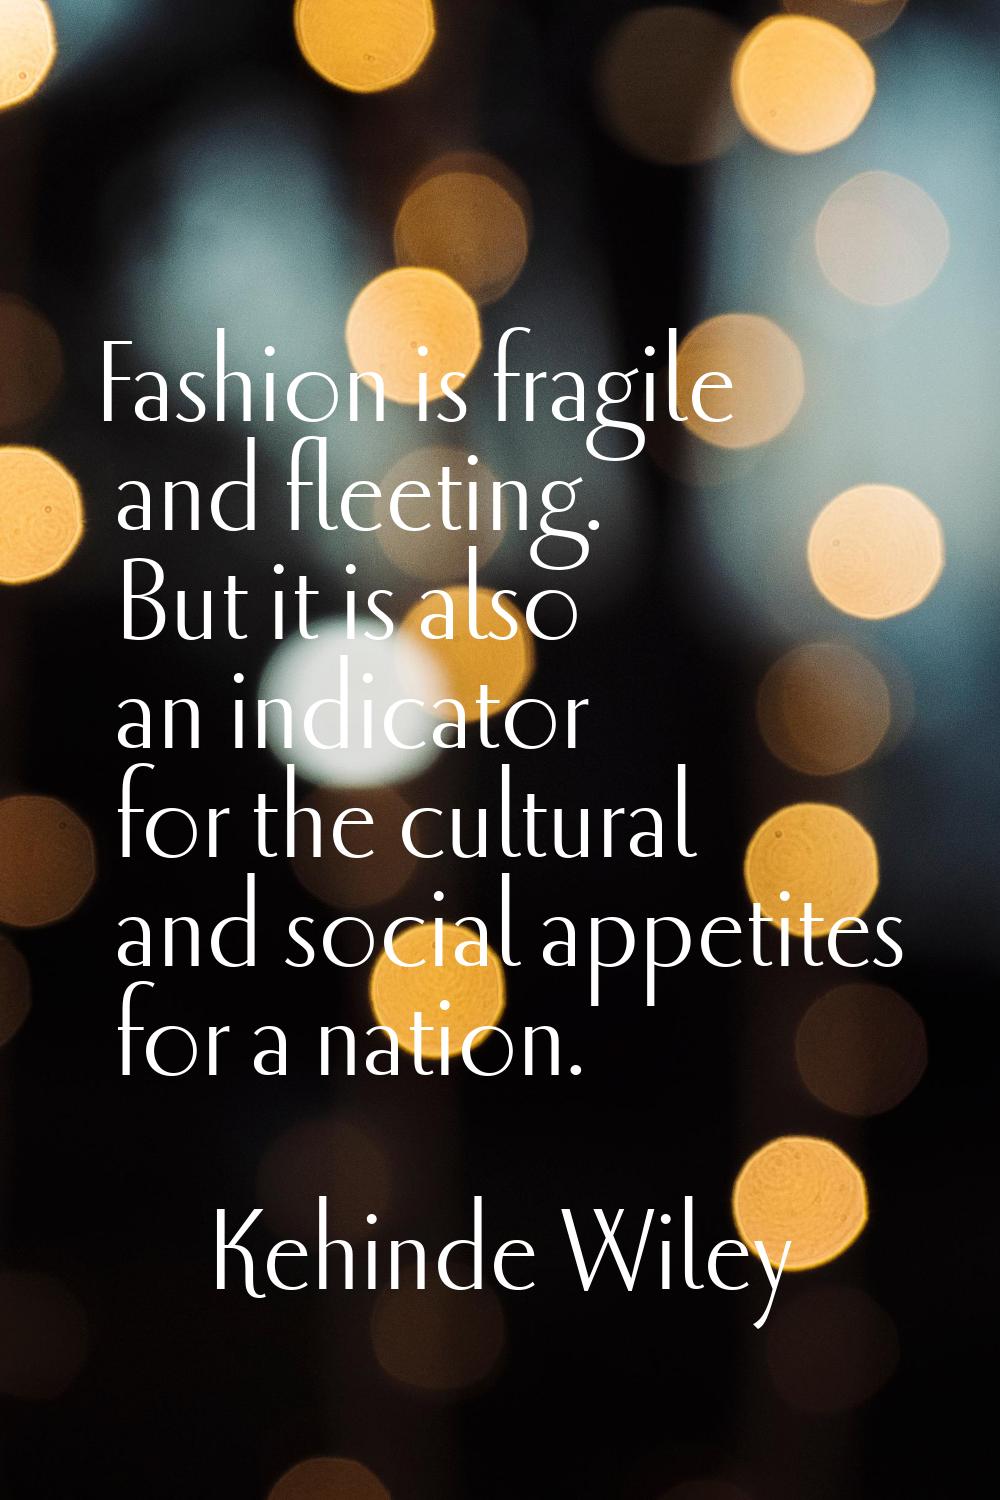 Fashion is fragile and fleeting. But it is also an indicator for the cultural and social appetites 